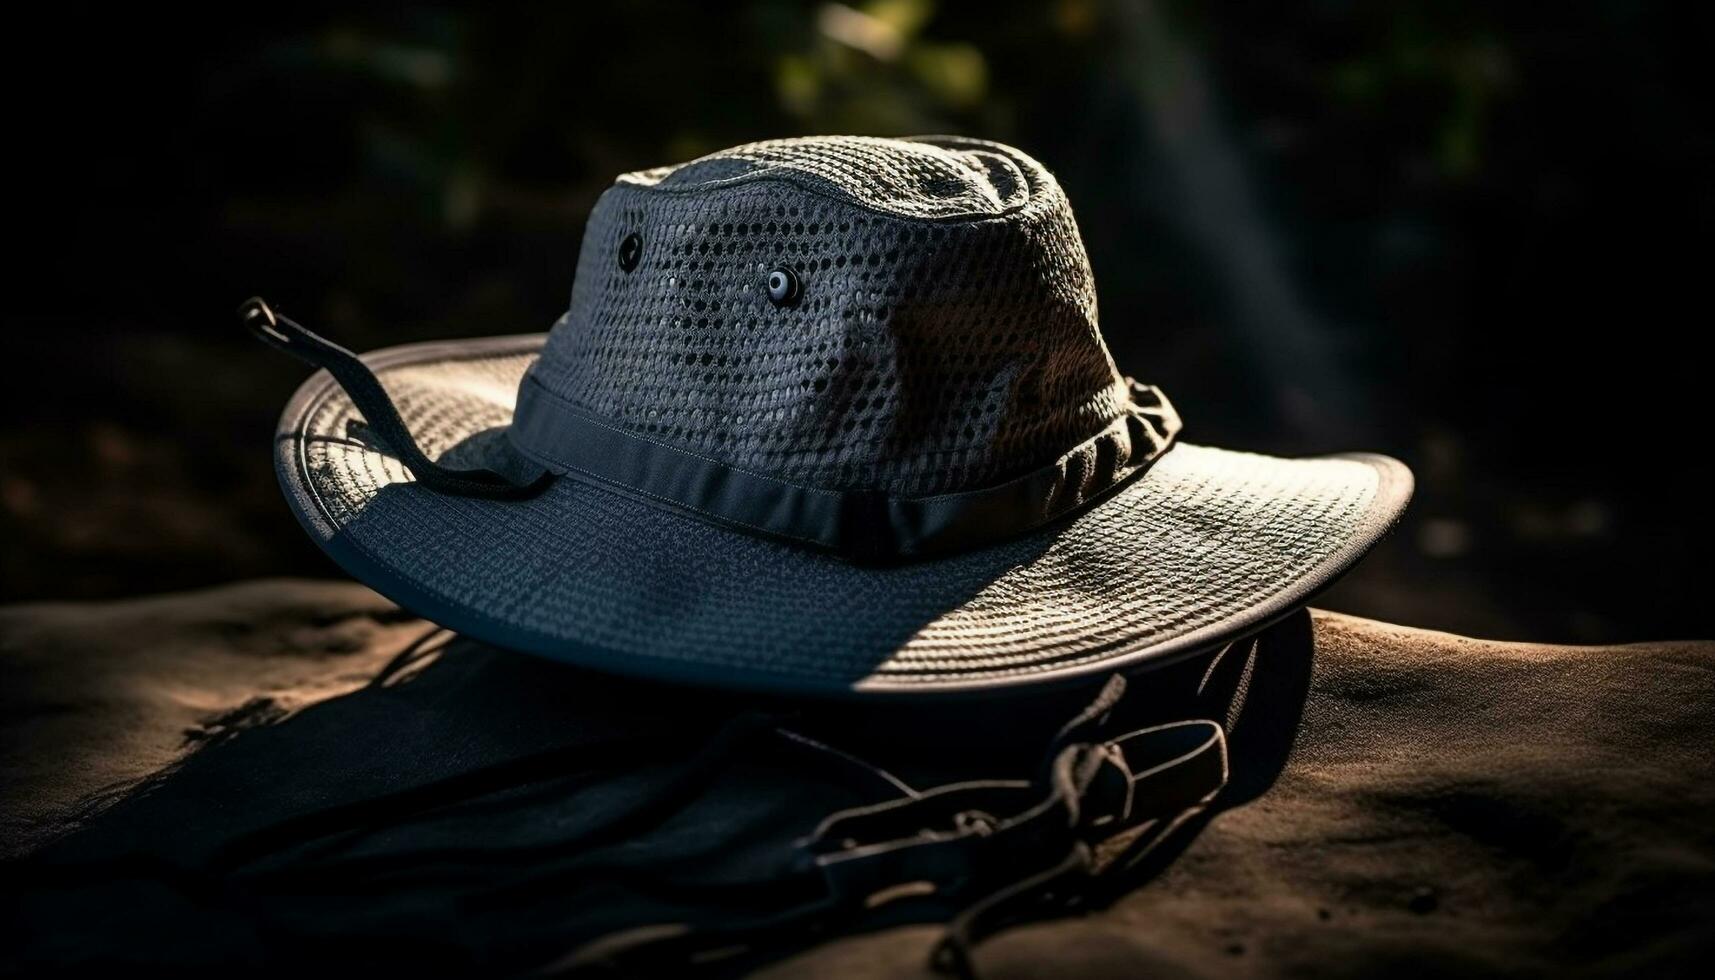 Cowboy hat shades young adult on farm generated by AI photo